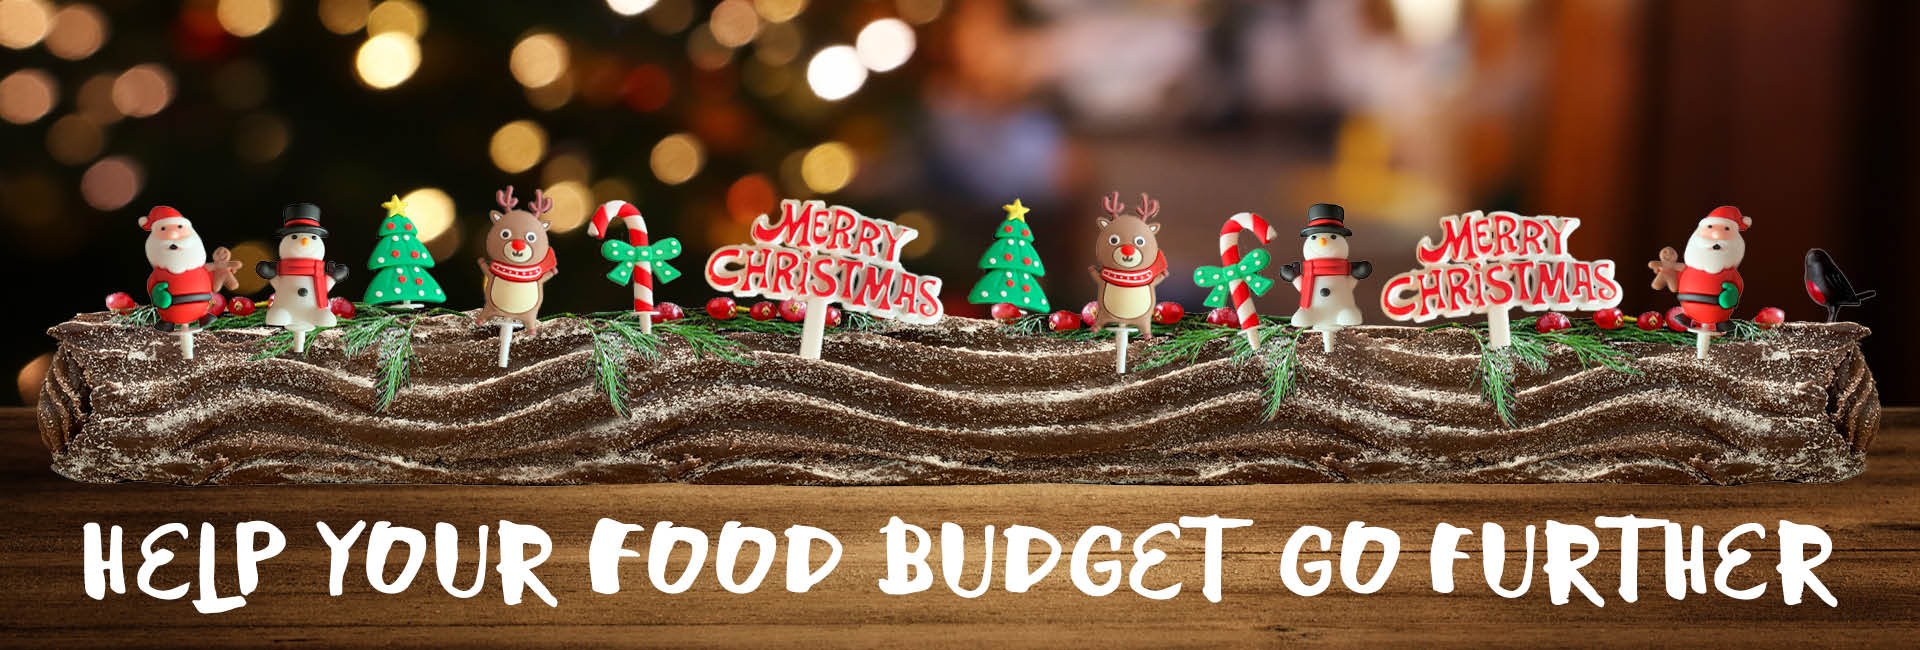 Help your food budget go further